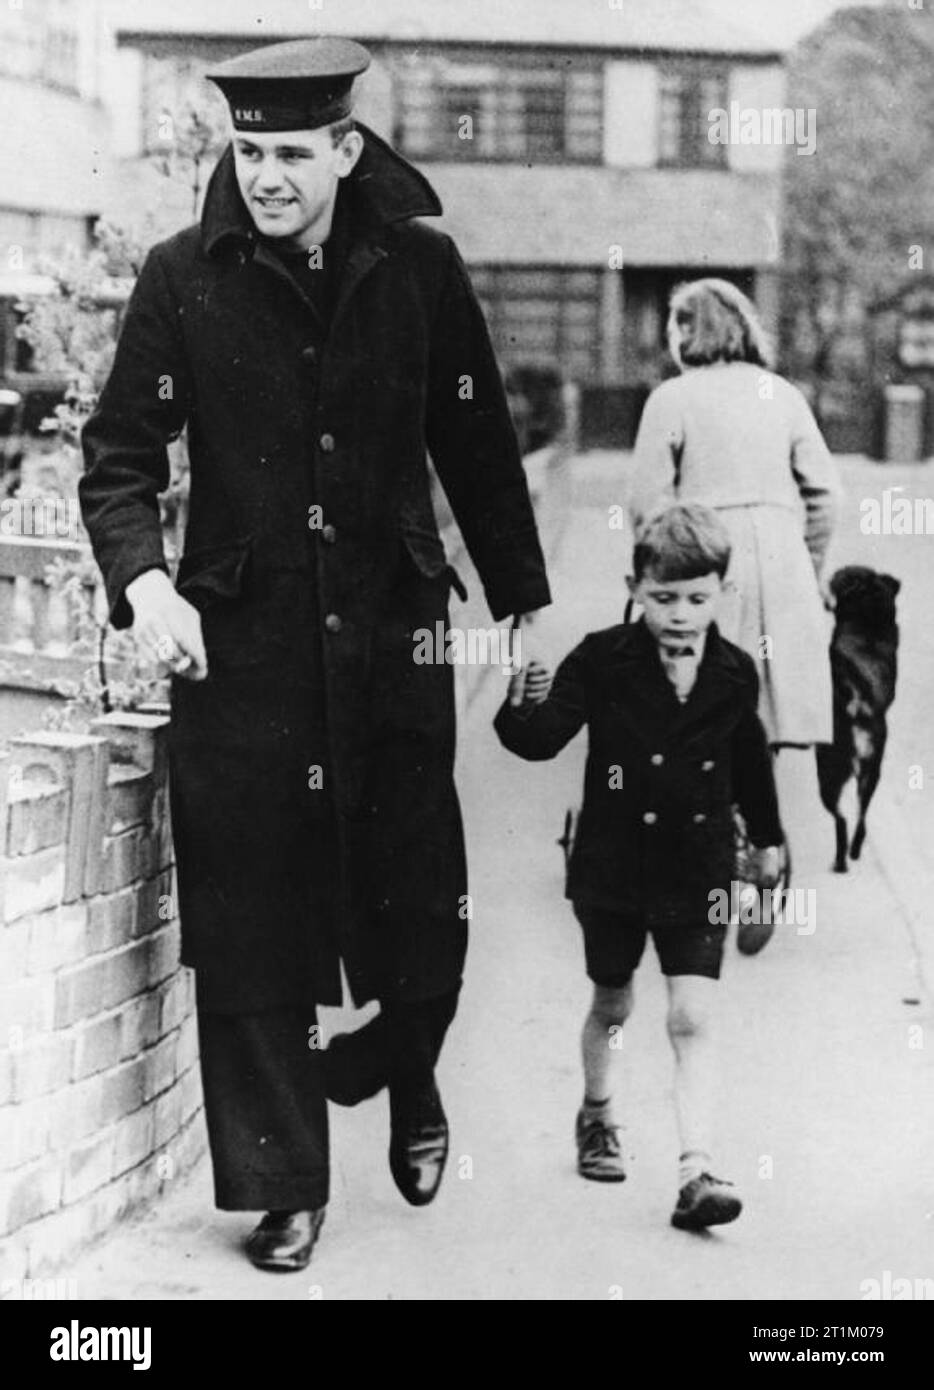 HMS Hood Seaman R Tilburn of Roundhay, Leeds, one of the three survivors of HMS HOOD out for a walk with his young brother, June 1941. Stock Photo